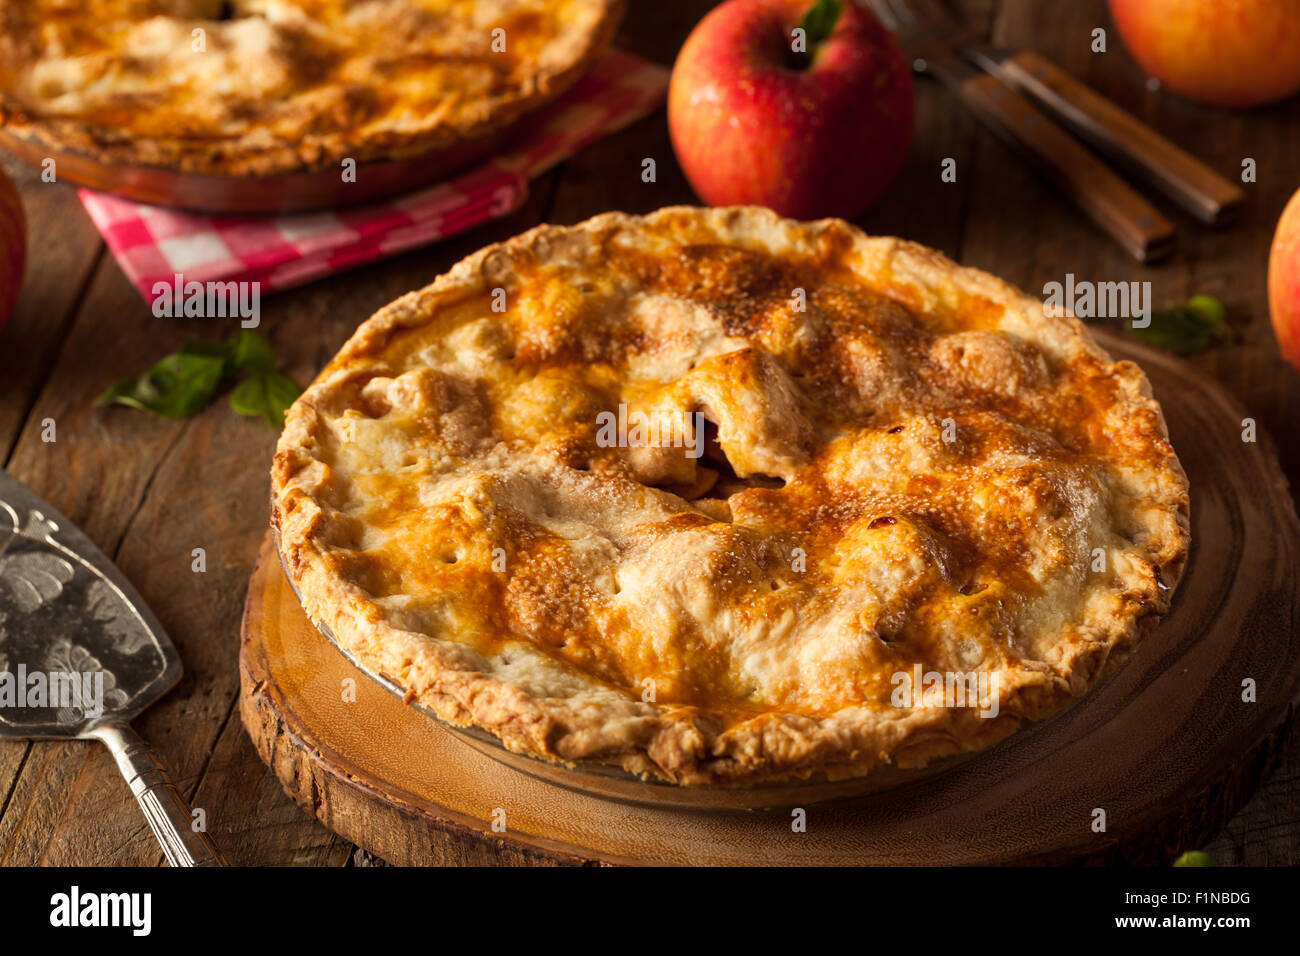 Fresh Homemade Apple Pie with a Flakey Crust Stock Photo